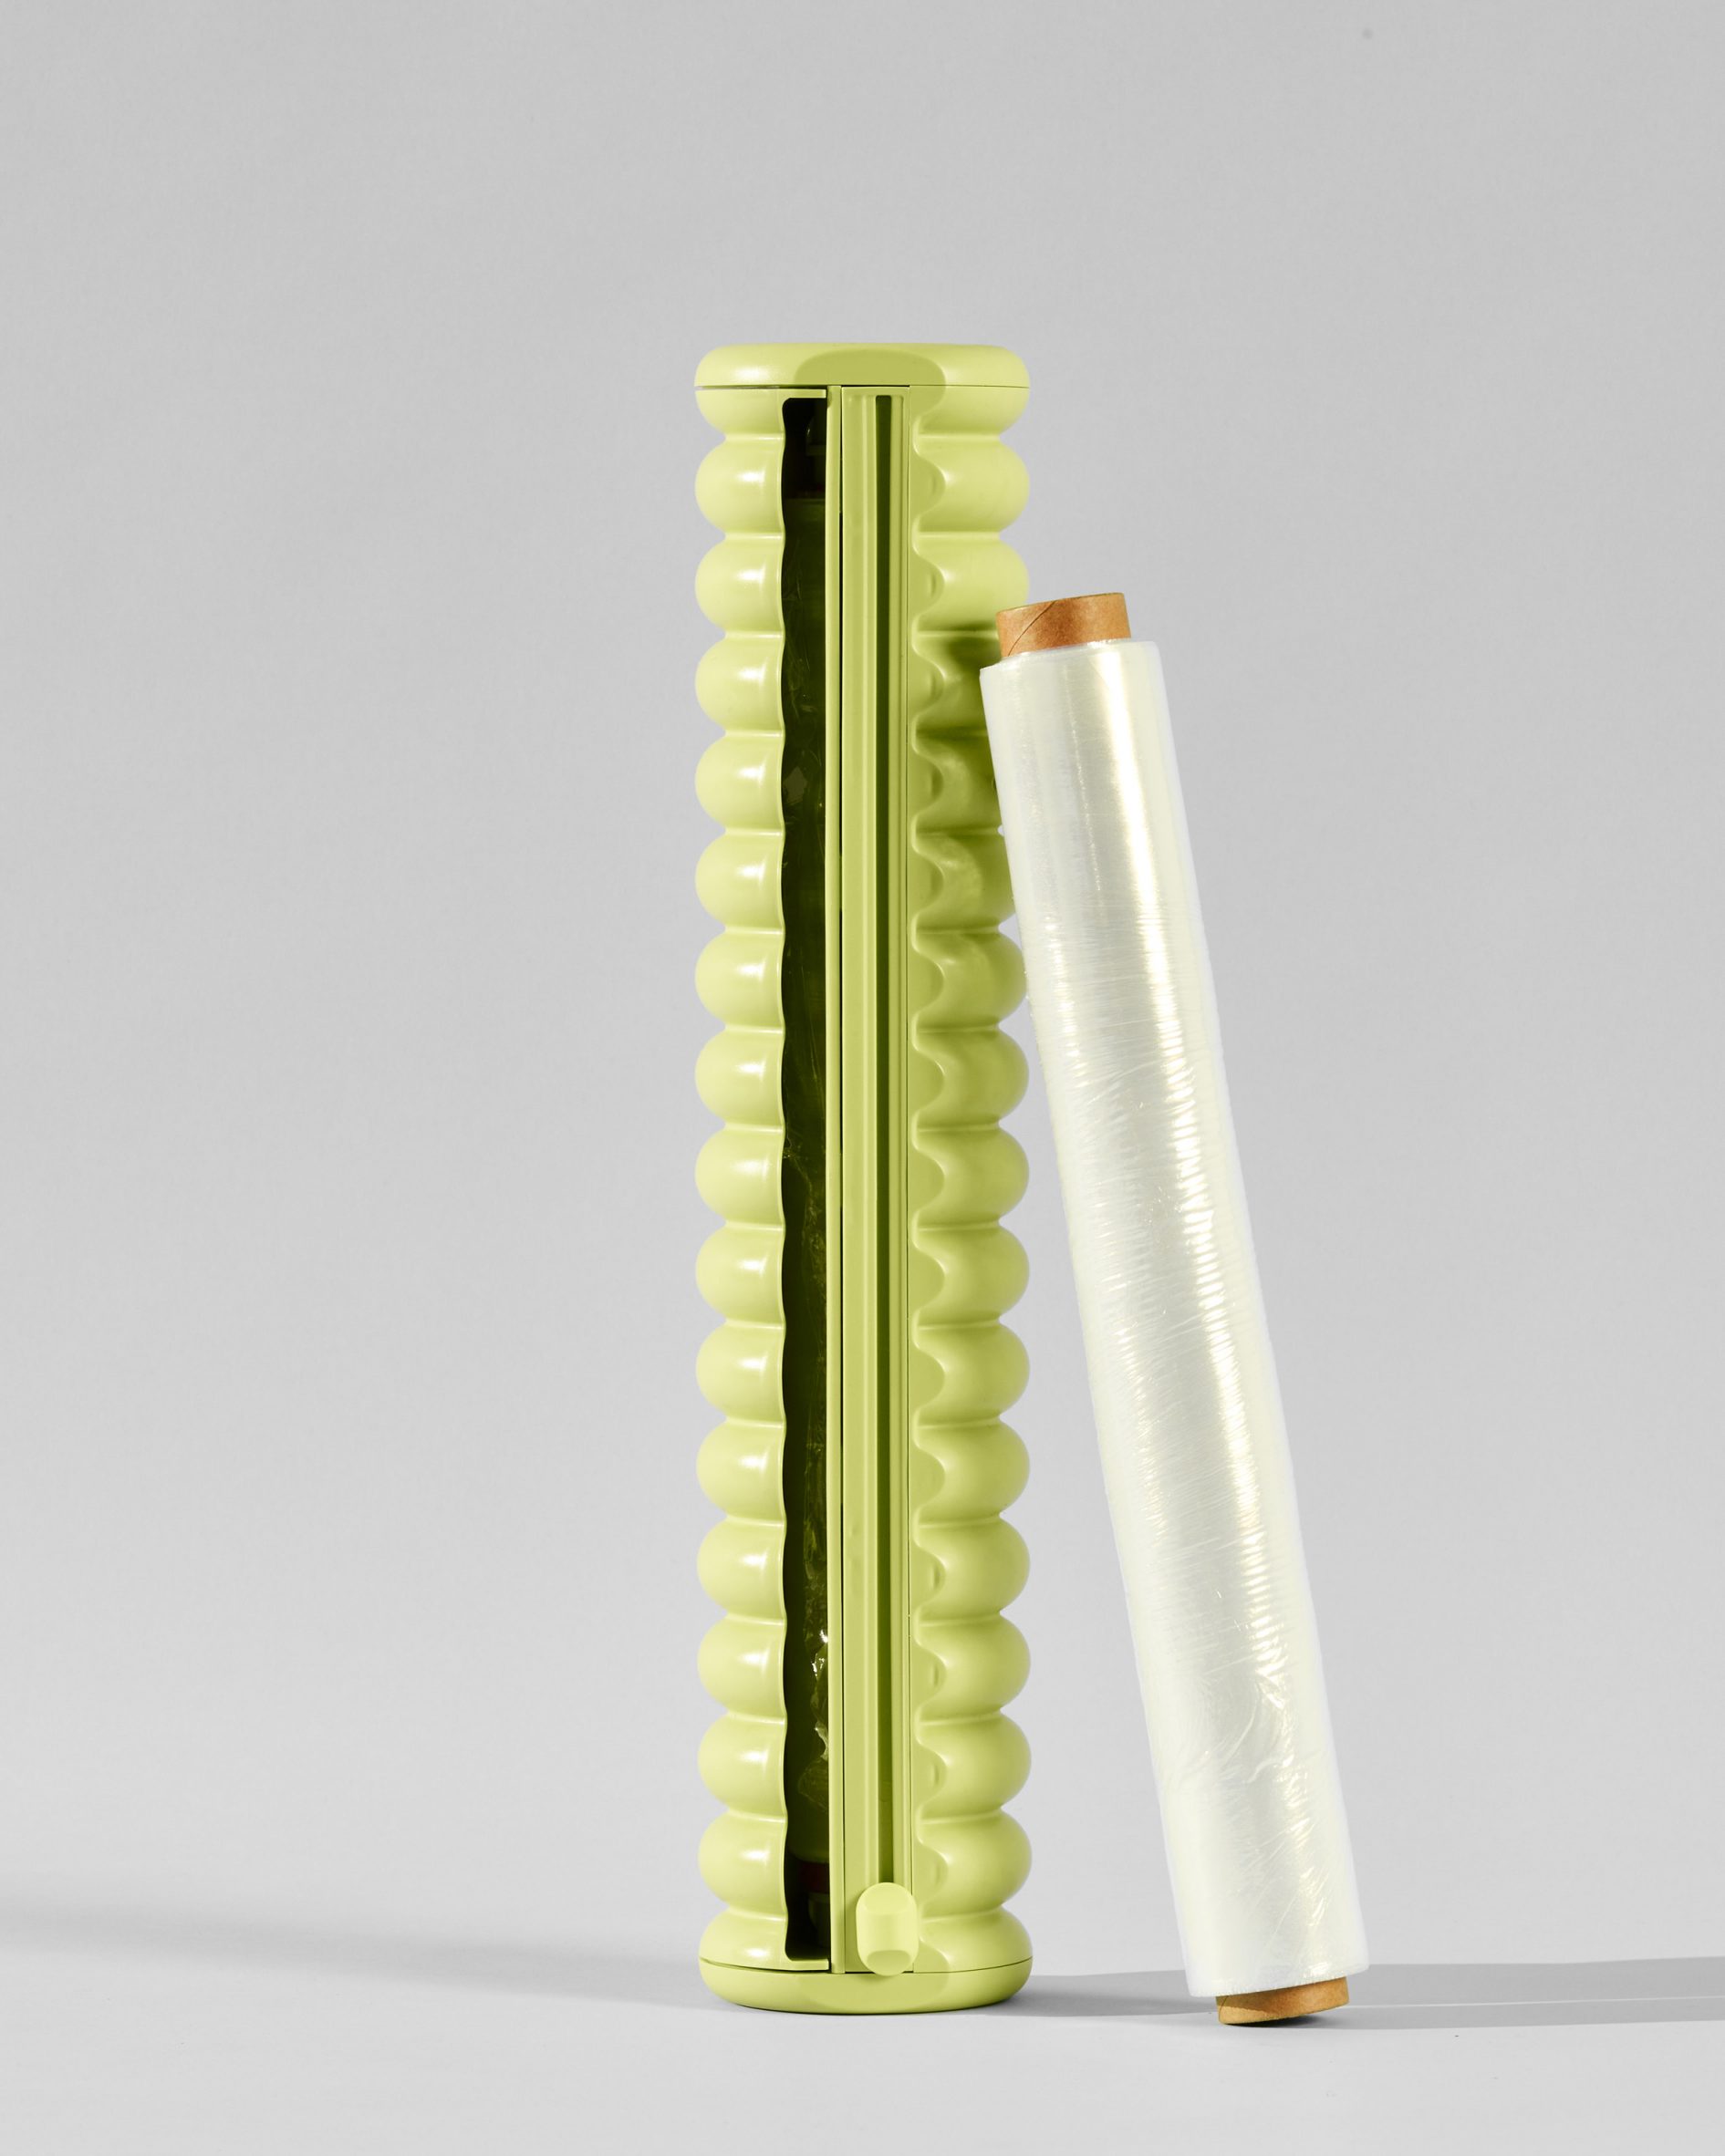 A roll of cling film next to a green dispenser